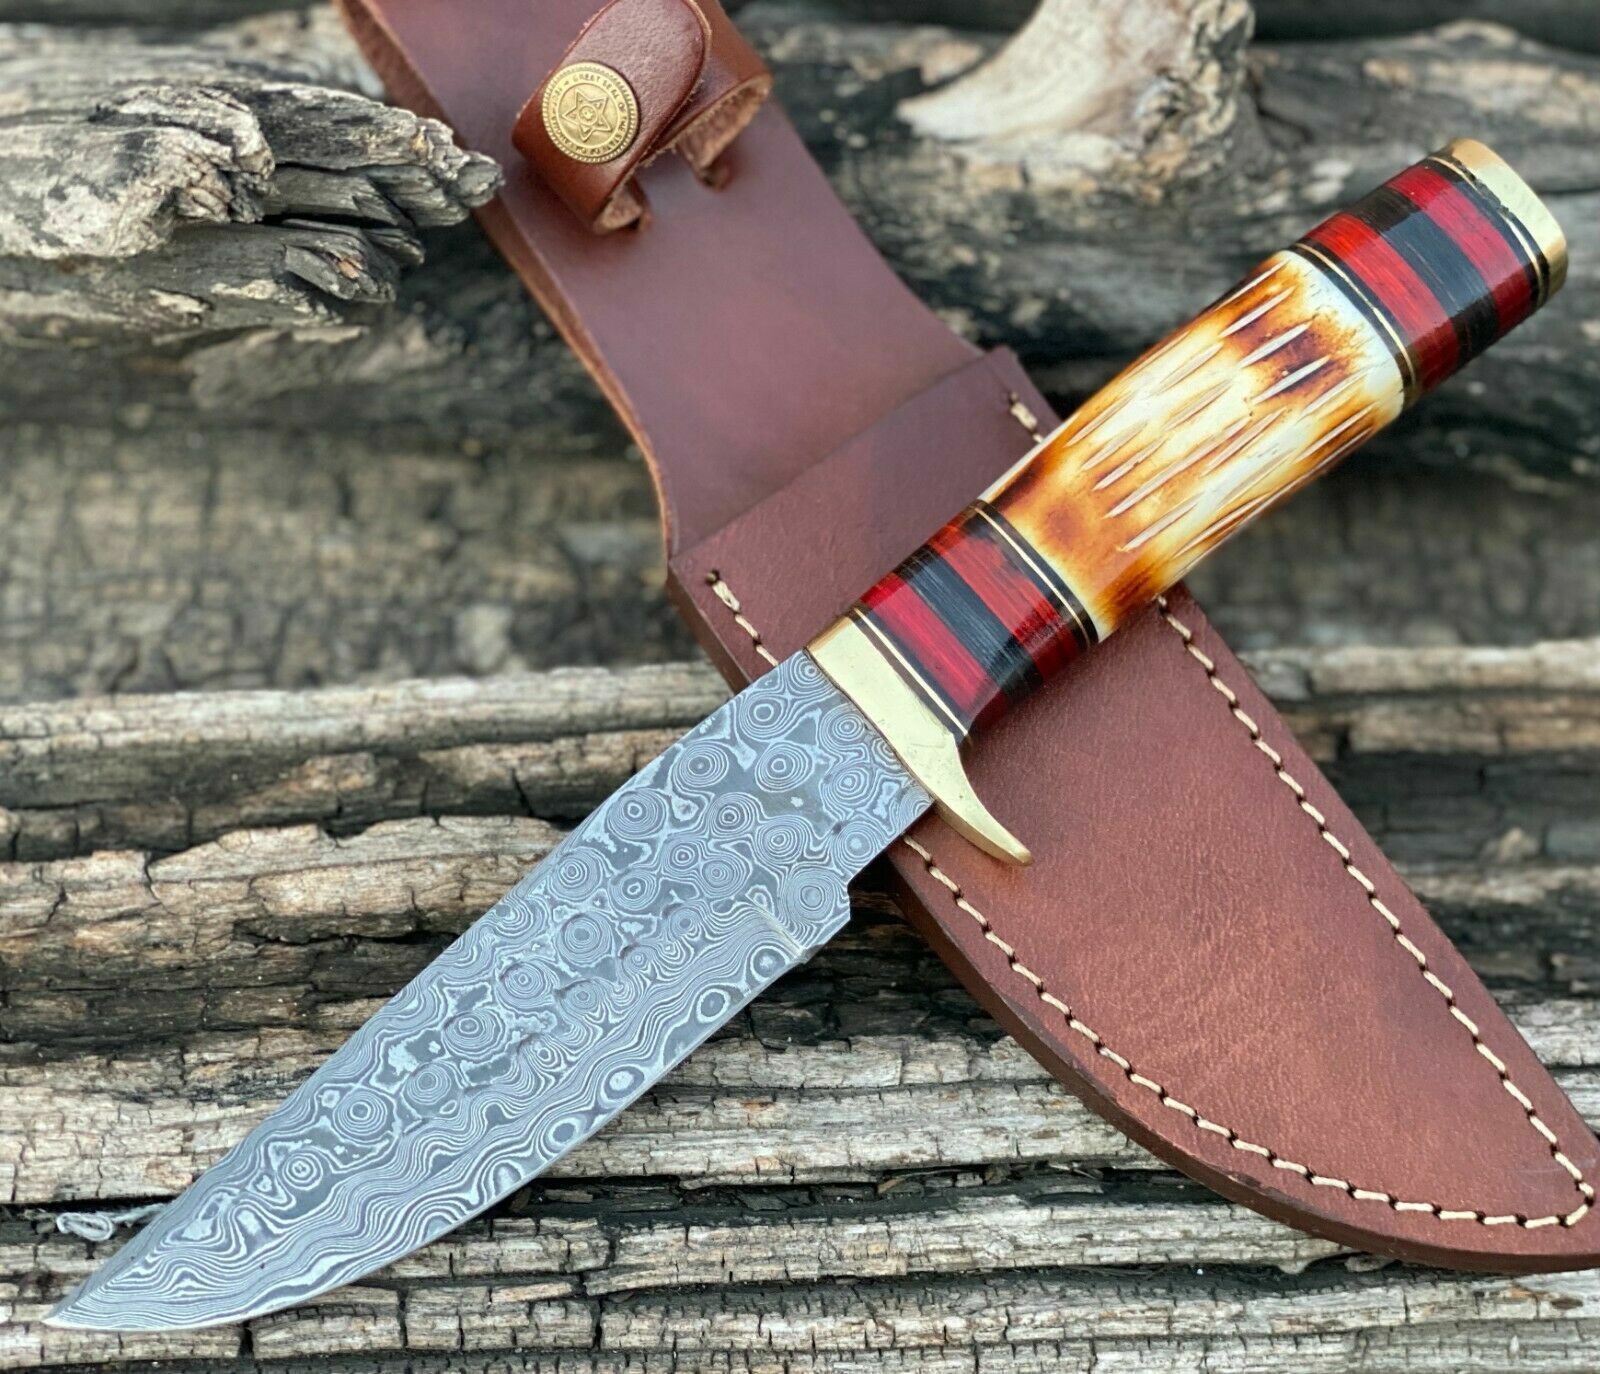 HANDMADE FORGED DAMASCUS Steel Hunting Knife With Brass Guard Camel Bone Handle